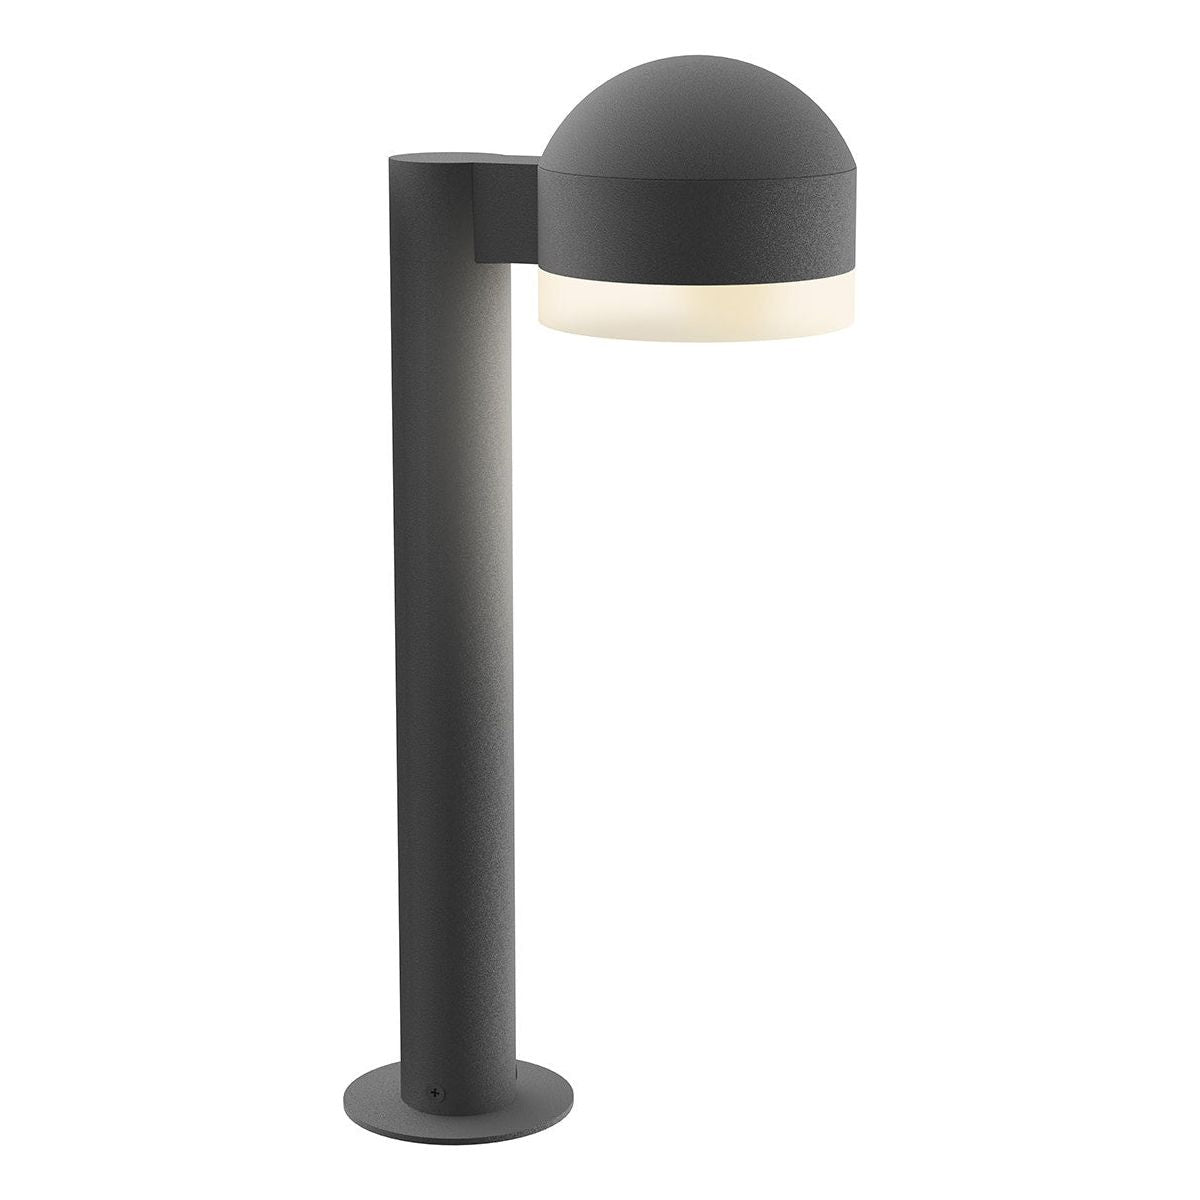 REALS 16" LED Bollard with Dome Cap and Cylinder Lens